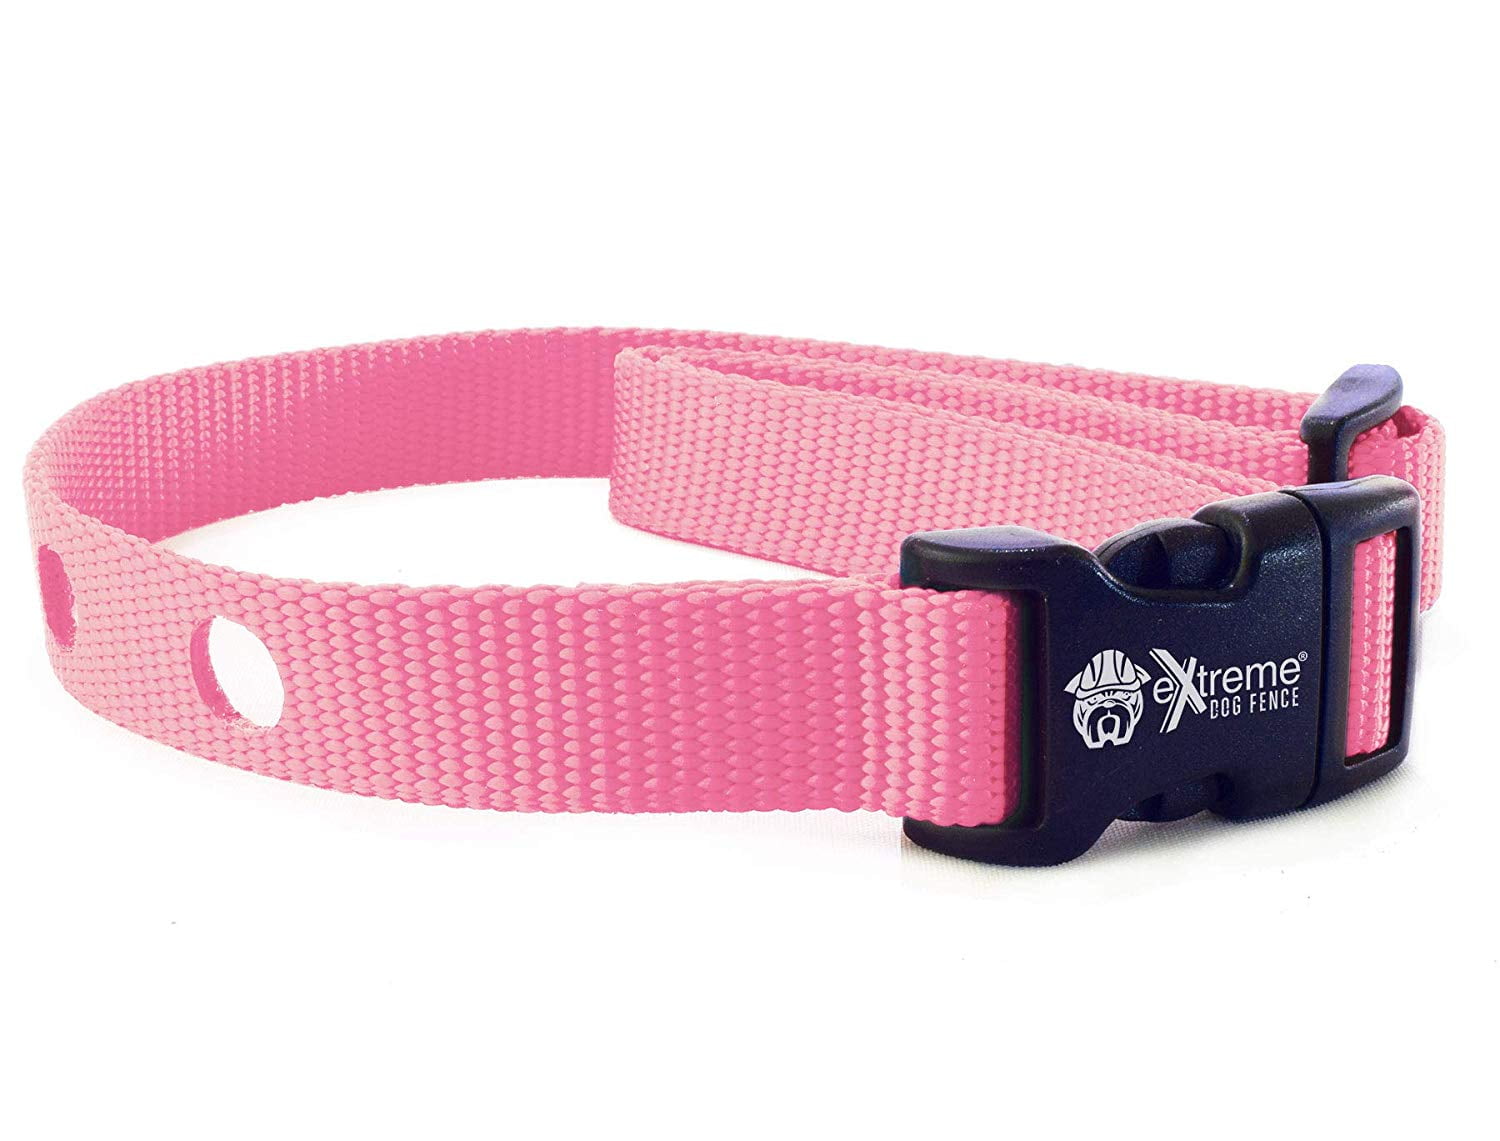 Extreme Dog Fence Dog Collar Replacement Strap Compatible with Nearly All Brands and Models of Underground Dog Fences 